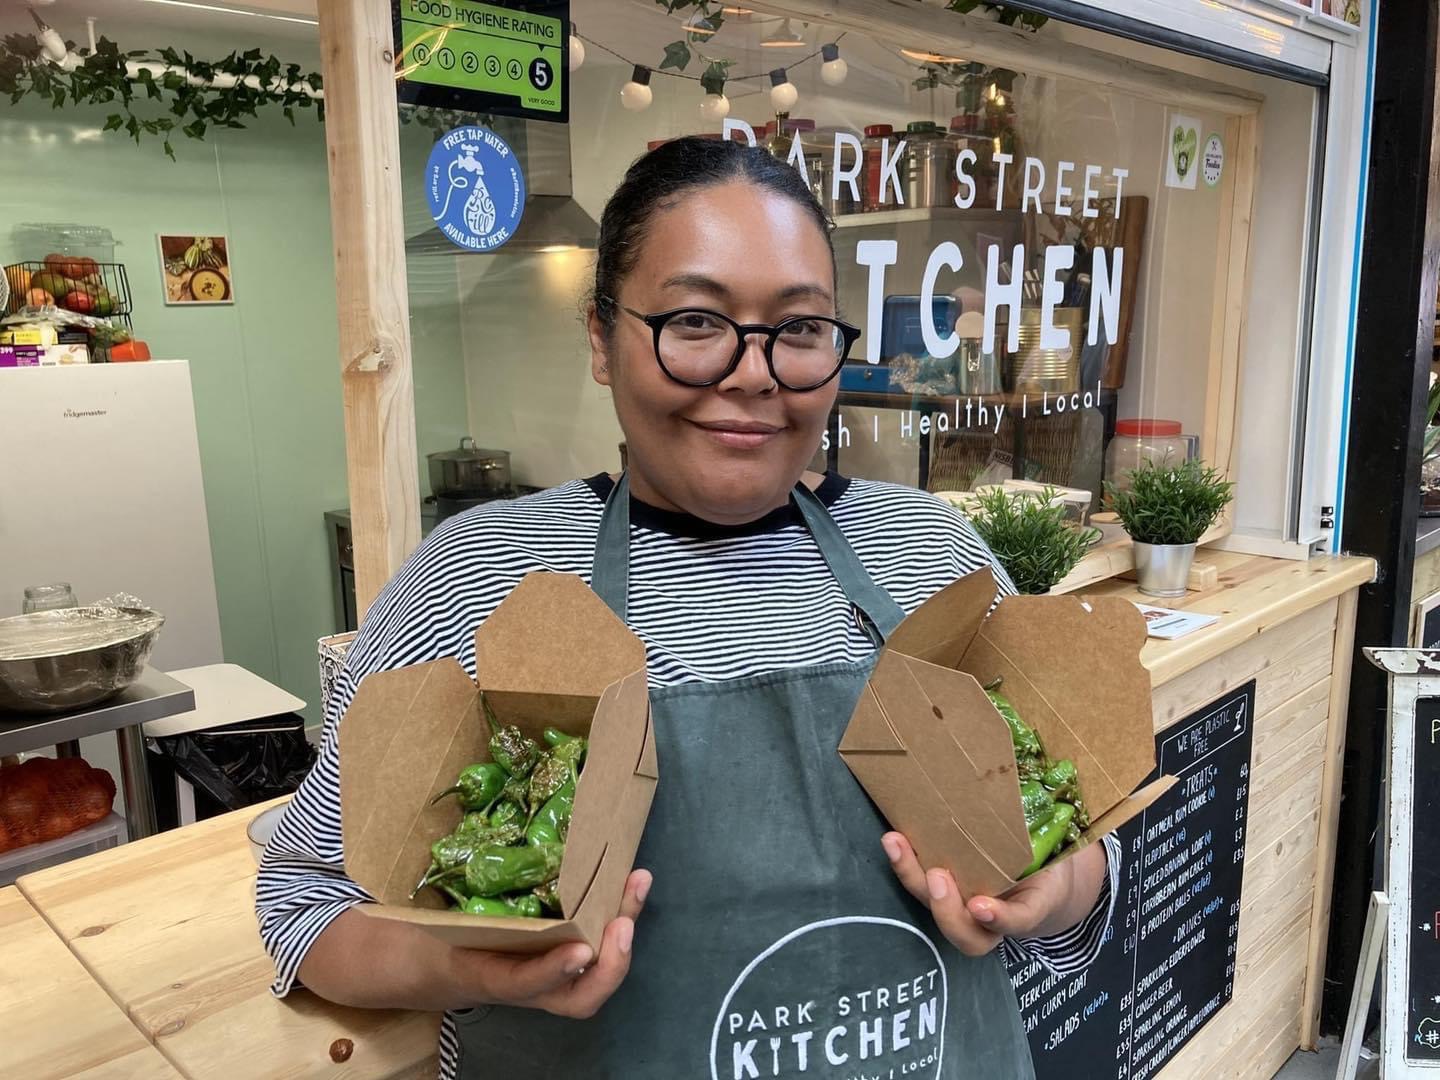 Employee holding food made at Park Street Kitchen